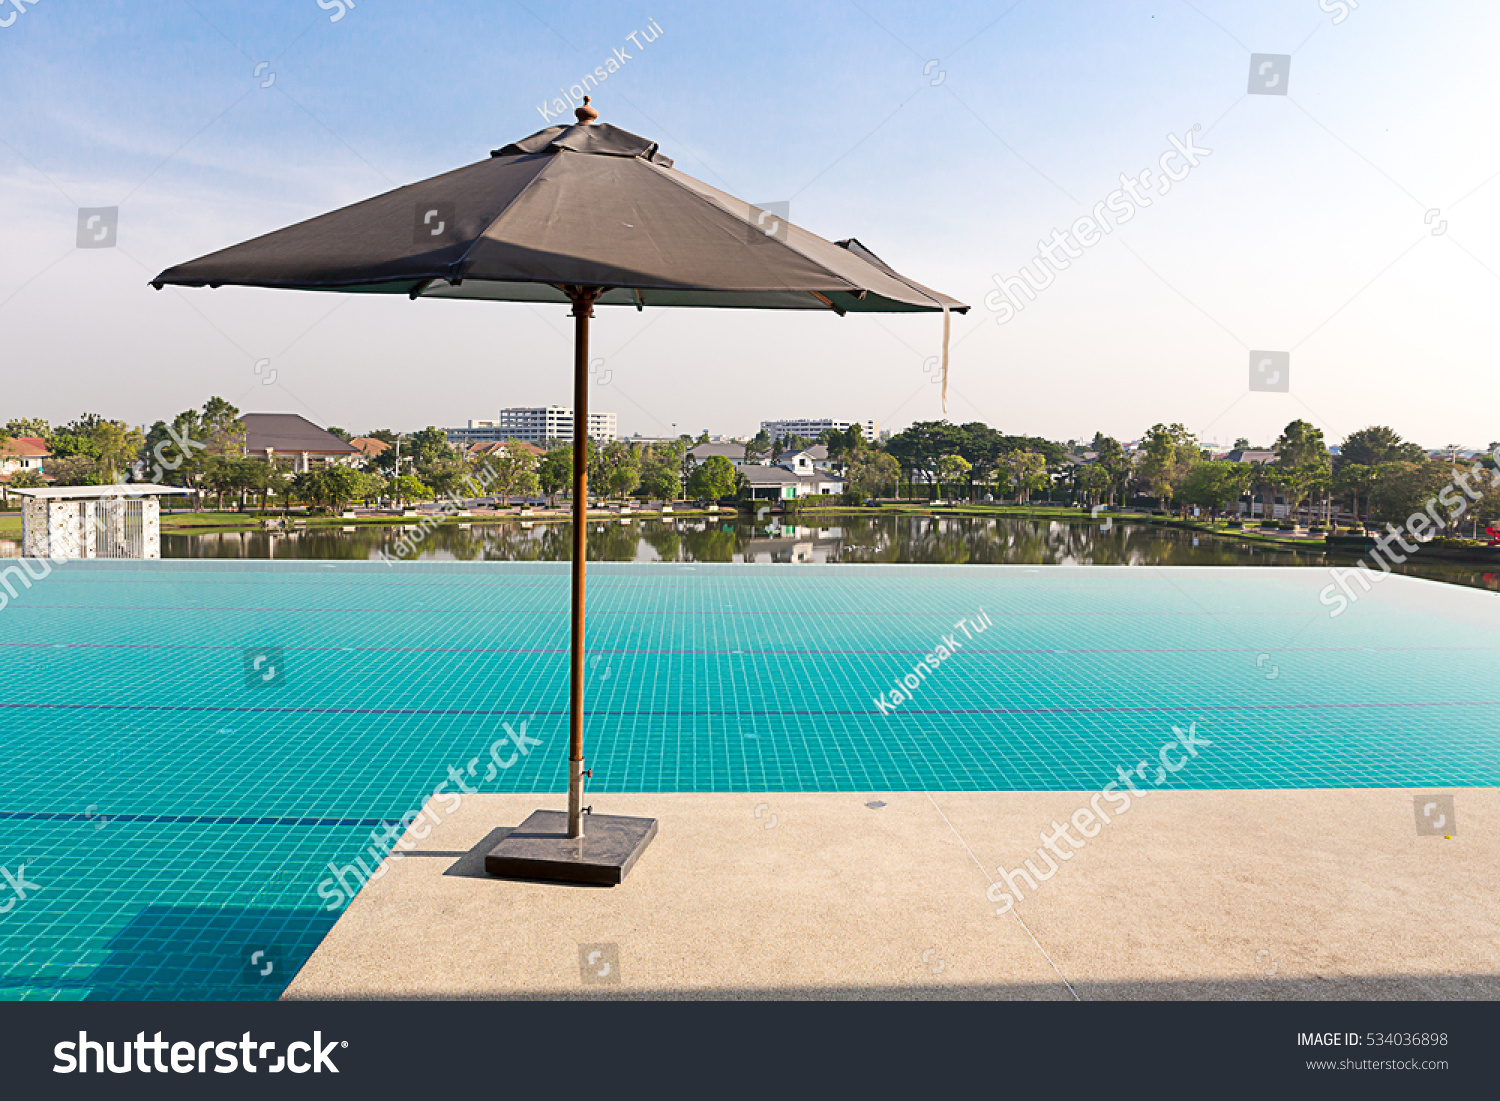 Umbrella service in upper deck swimming pool in luxury village with beautiful sky at morning. #534036898